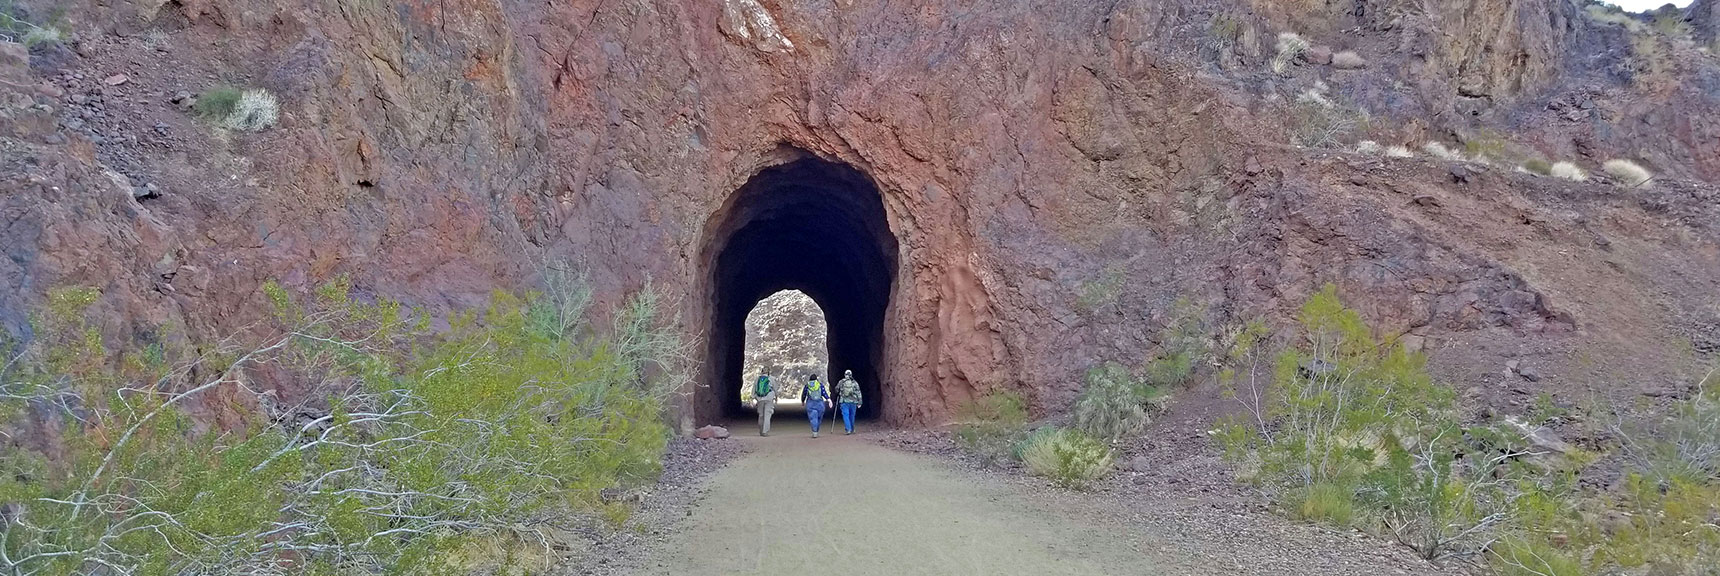 Hikers Entering Tunnel #4 | Historic Railroad Trail | Lake Mead National Recreation Area, Nevada